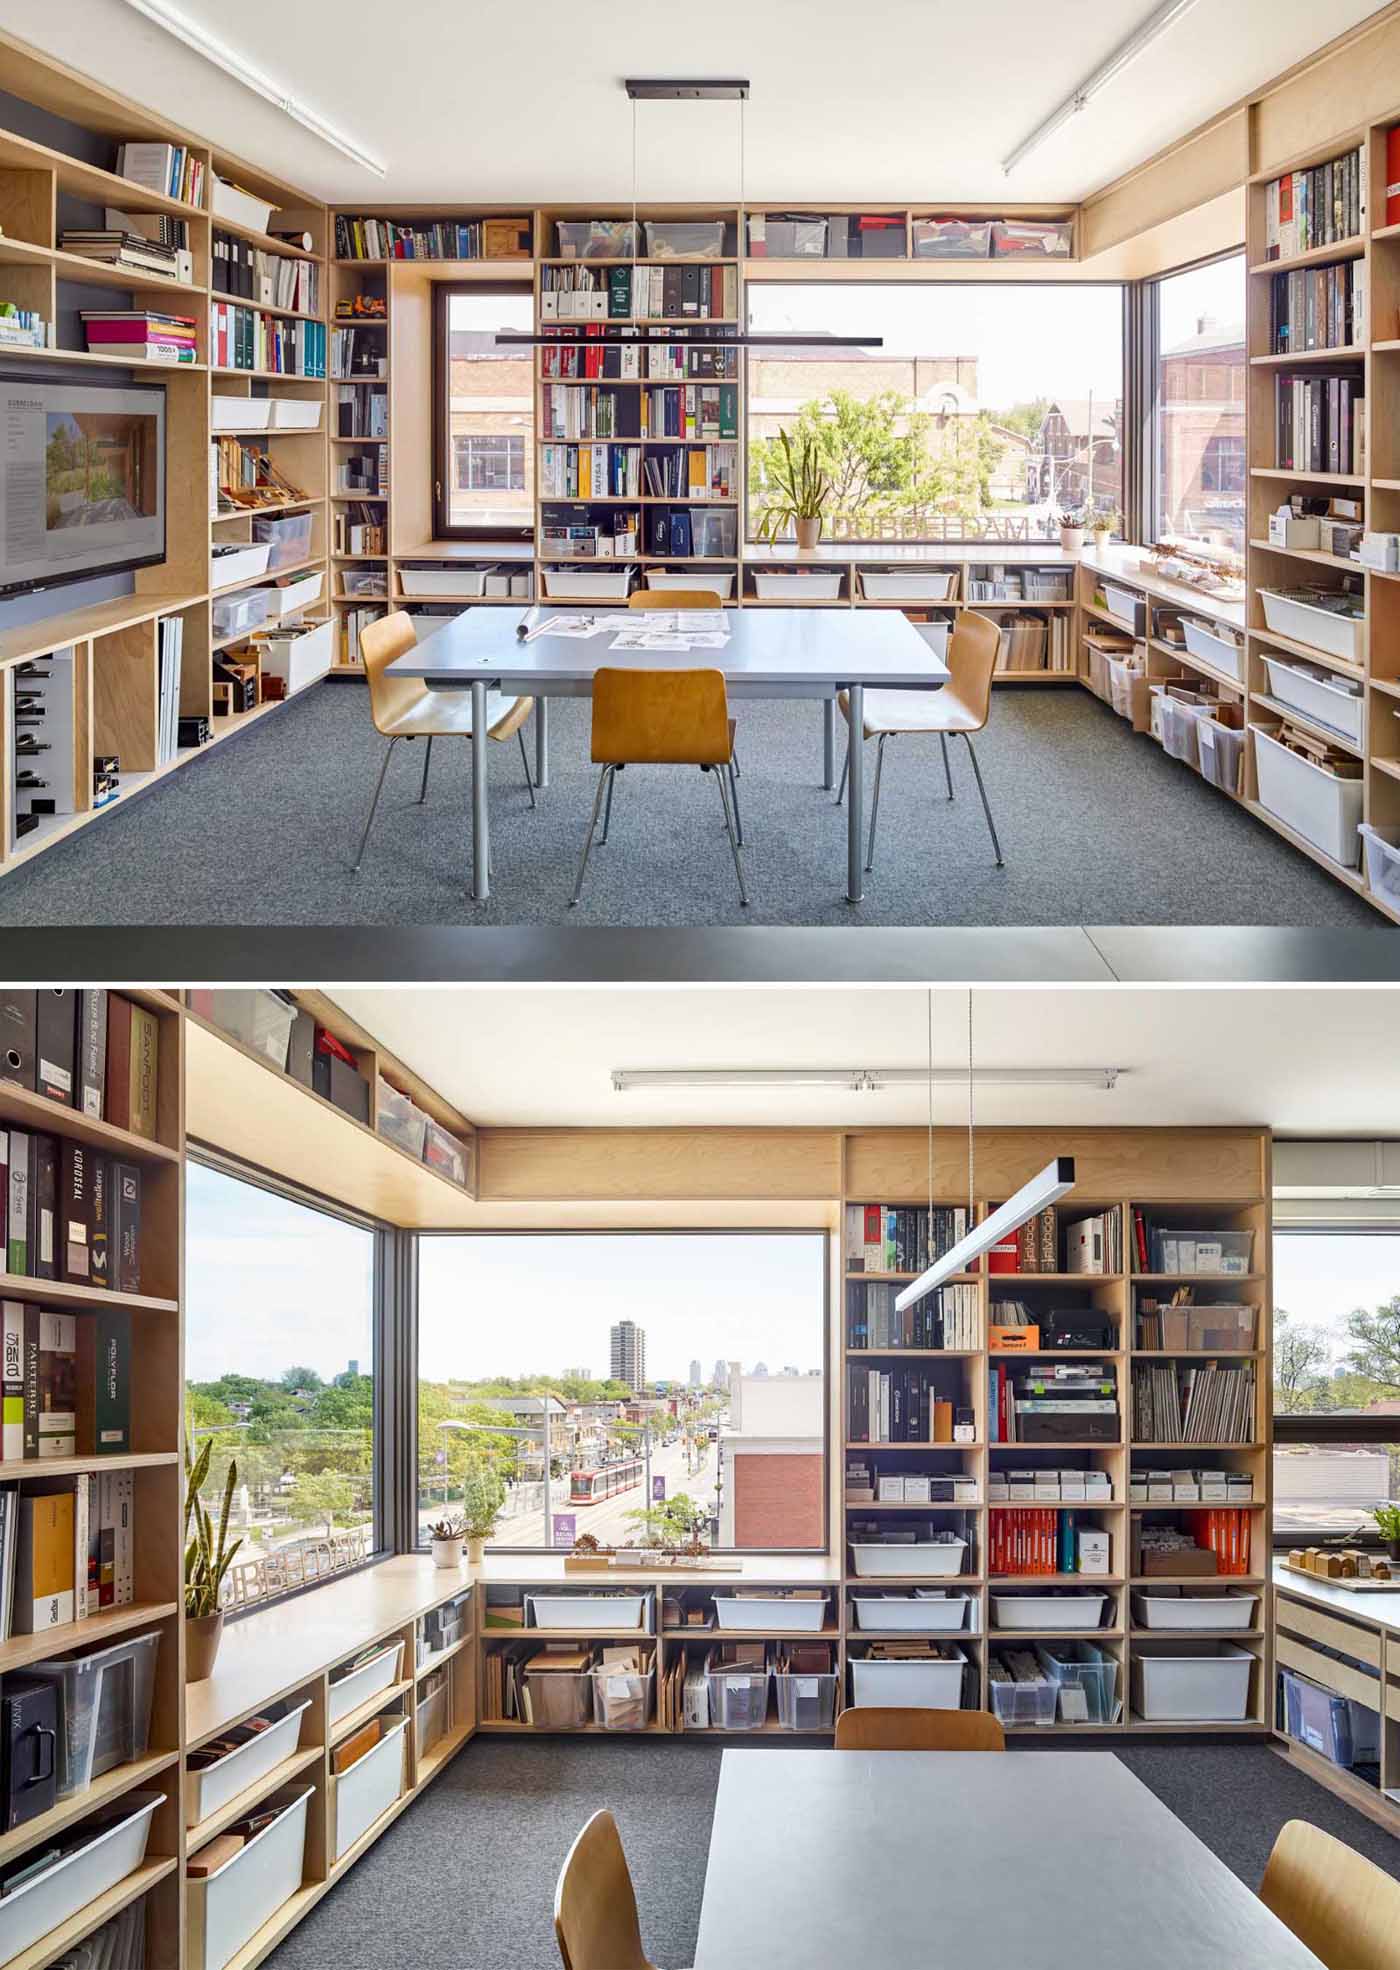 The open workspace includes natural light and passive ventilation offered by the many operable windows, while open shelving provides much-needed storage space.